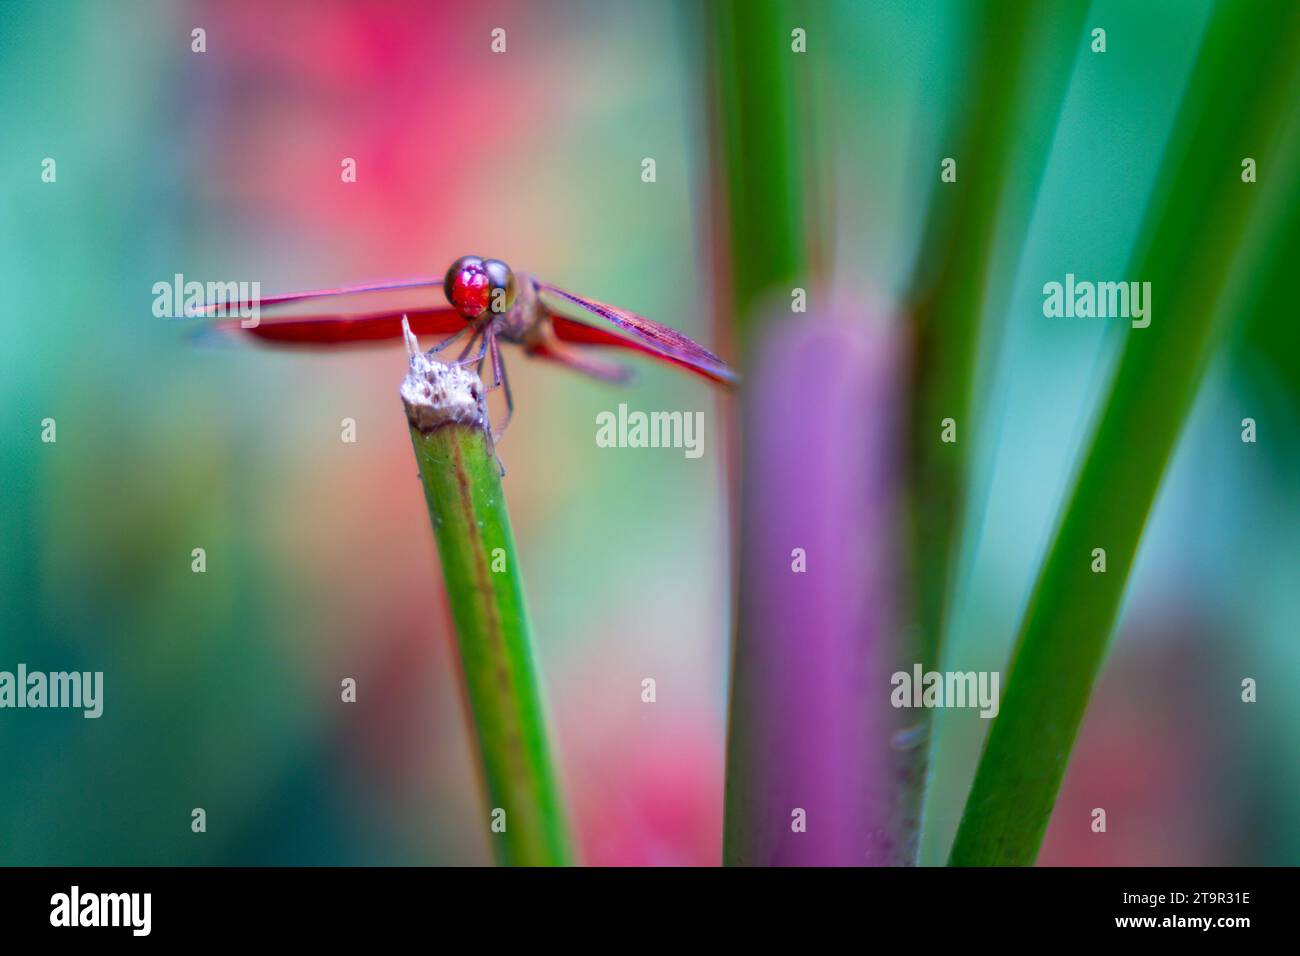 A macro of a dragonfly on a plant at Butterfly Sanctuary, Lazi, Siquijor, Philippines Stock Photo